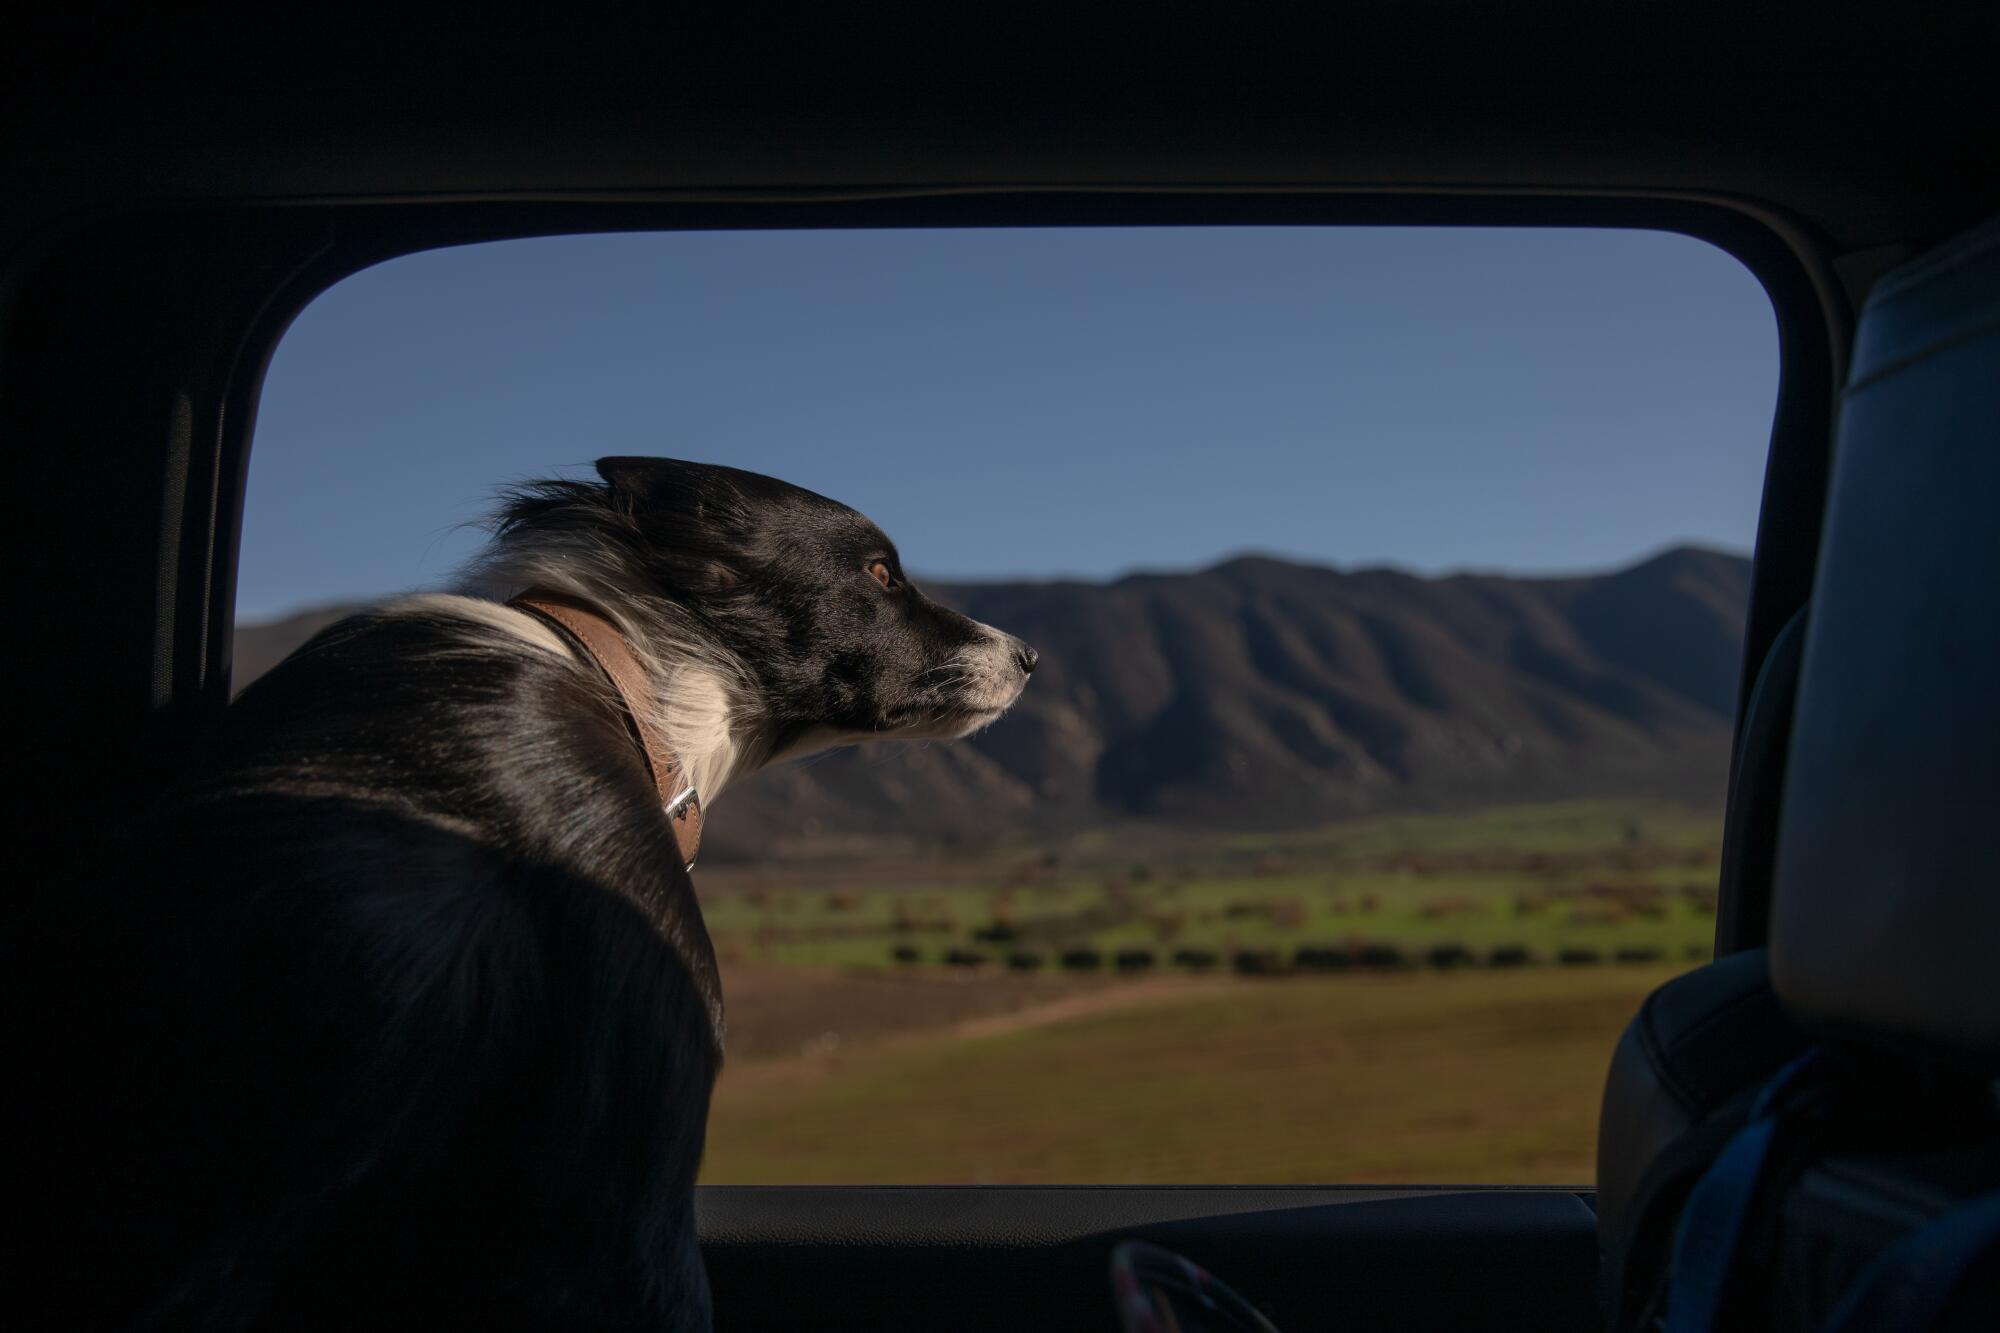 A black and white border collie leaning her head out of a car window.